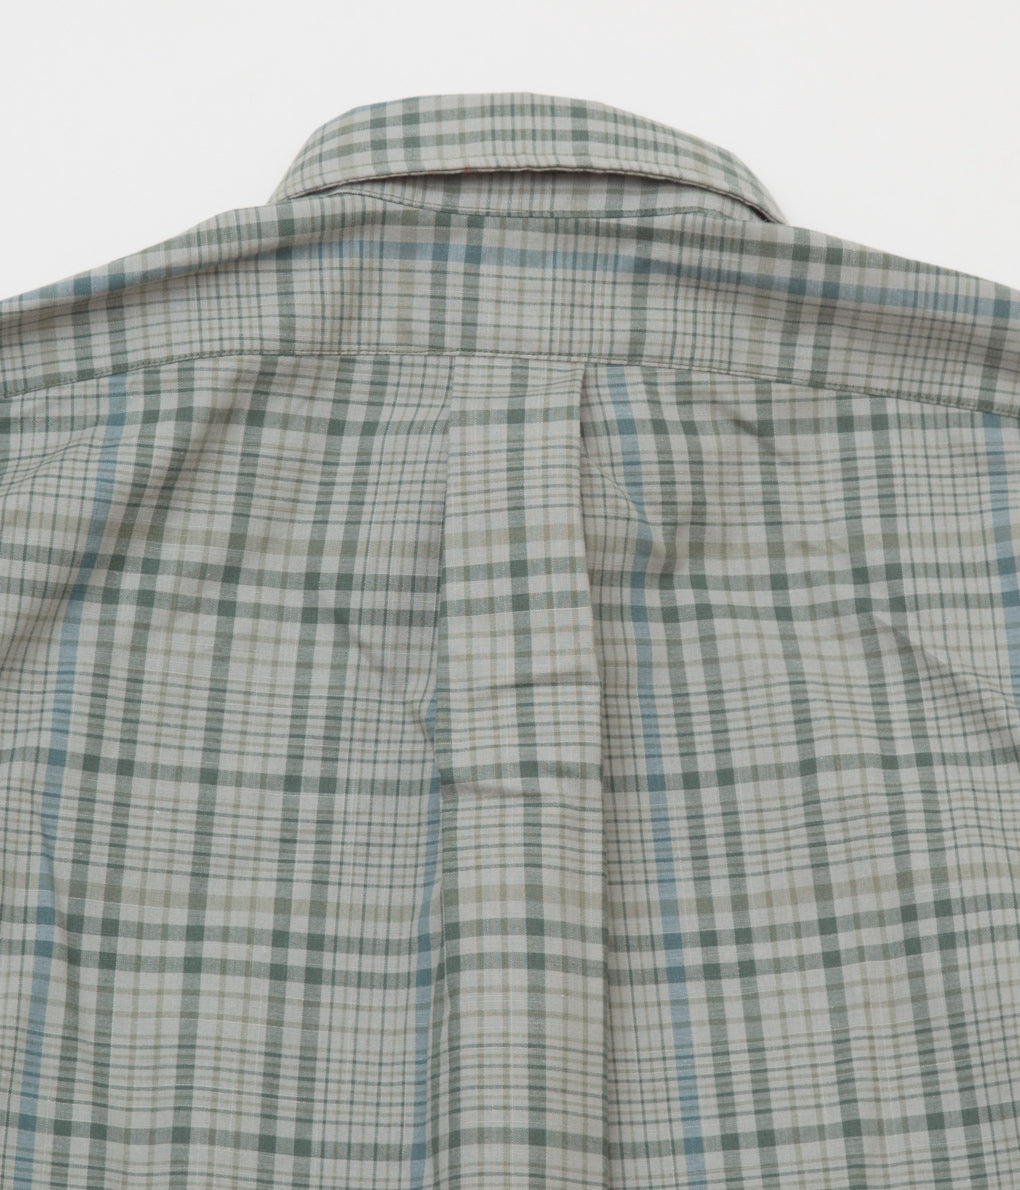 INDIVIDUALIZED SHIRTS "MADRAS CHECK (STANDARD FIT POPOVER SHIRT)" (BASIL)